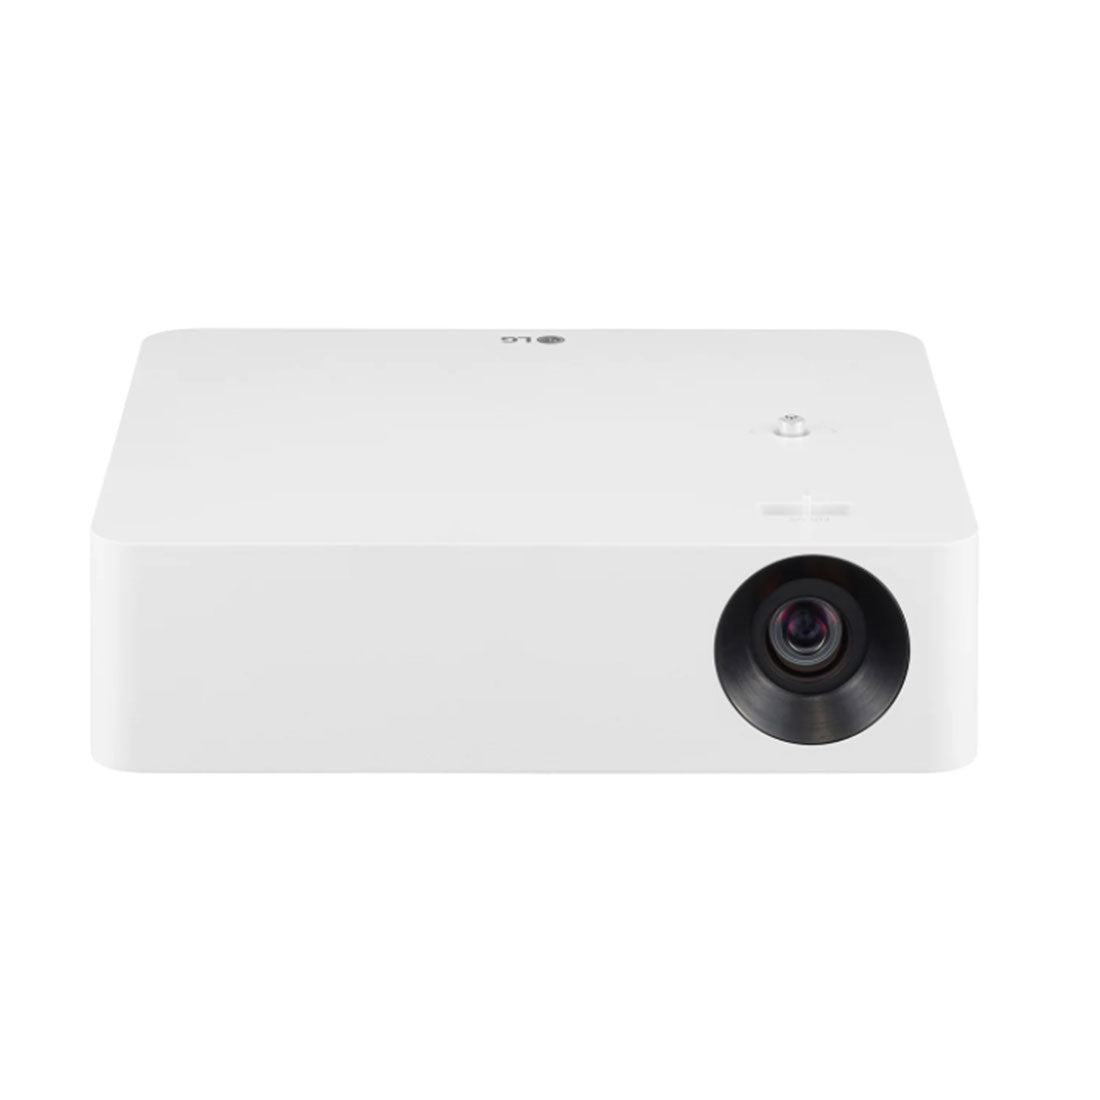 LG PF610P Full HD LED Portable Smart Home Theater CineBeam Projector - 2021 Model